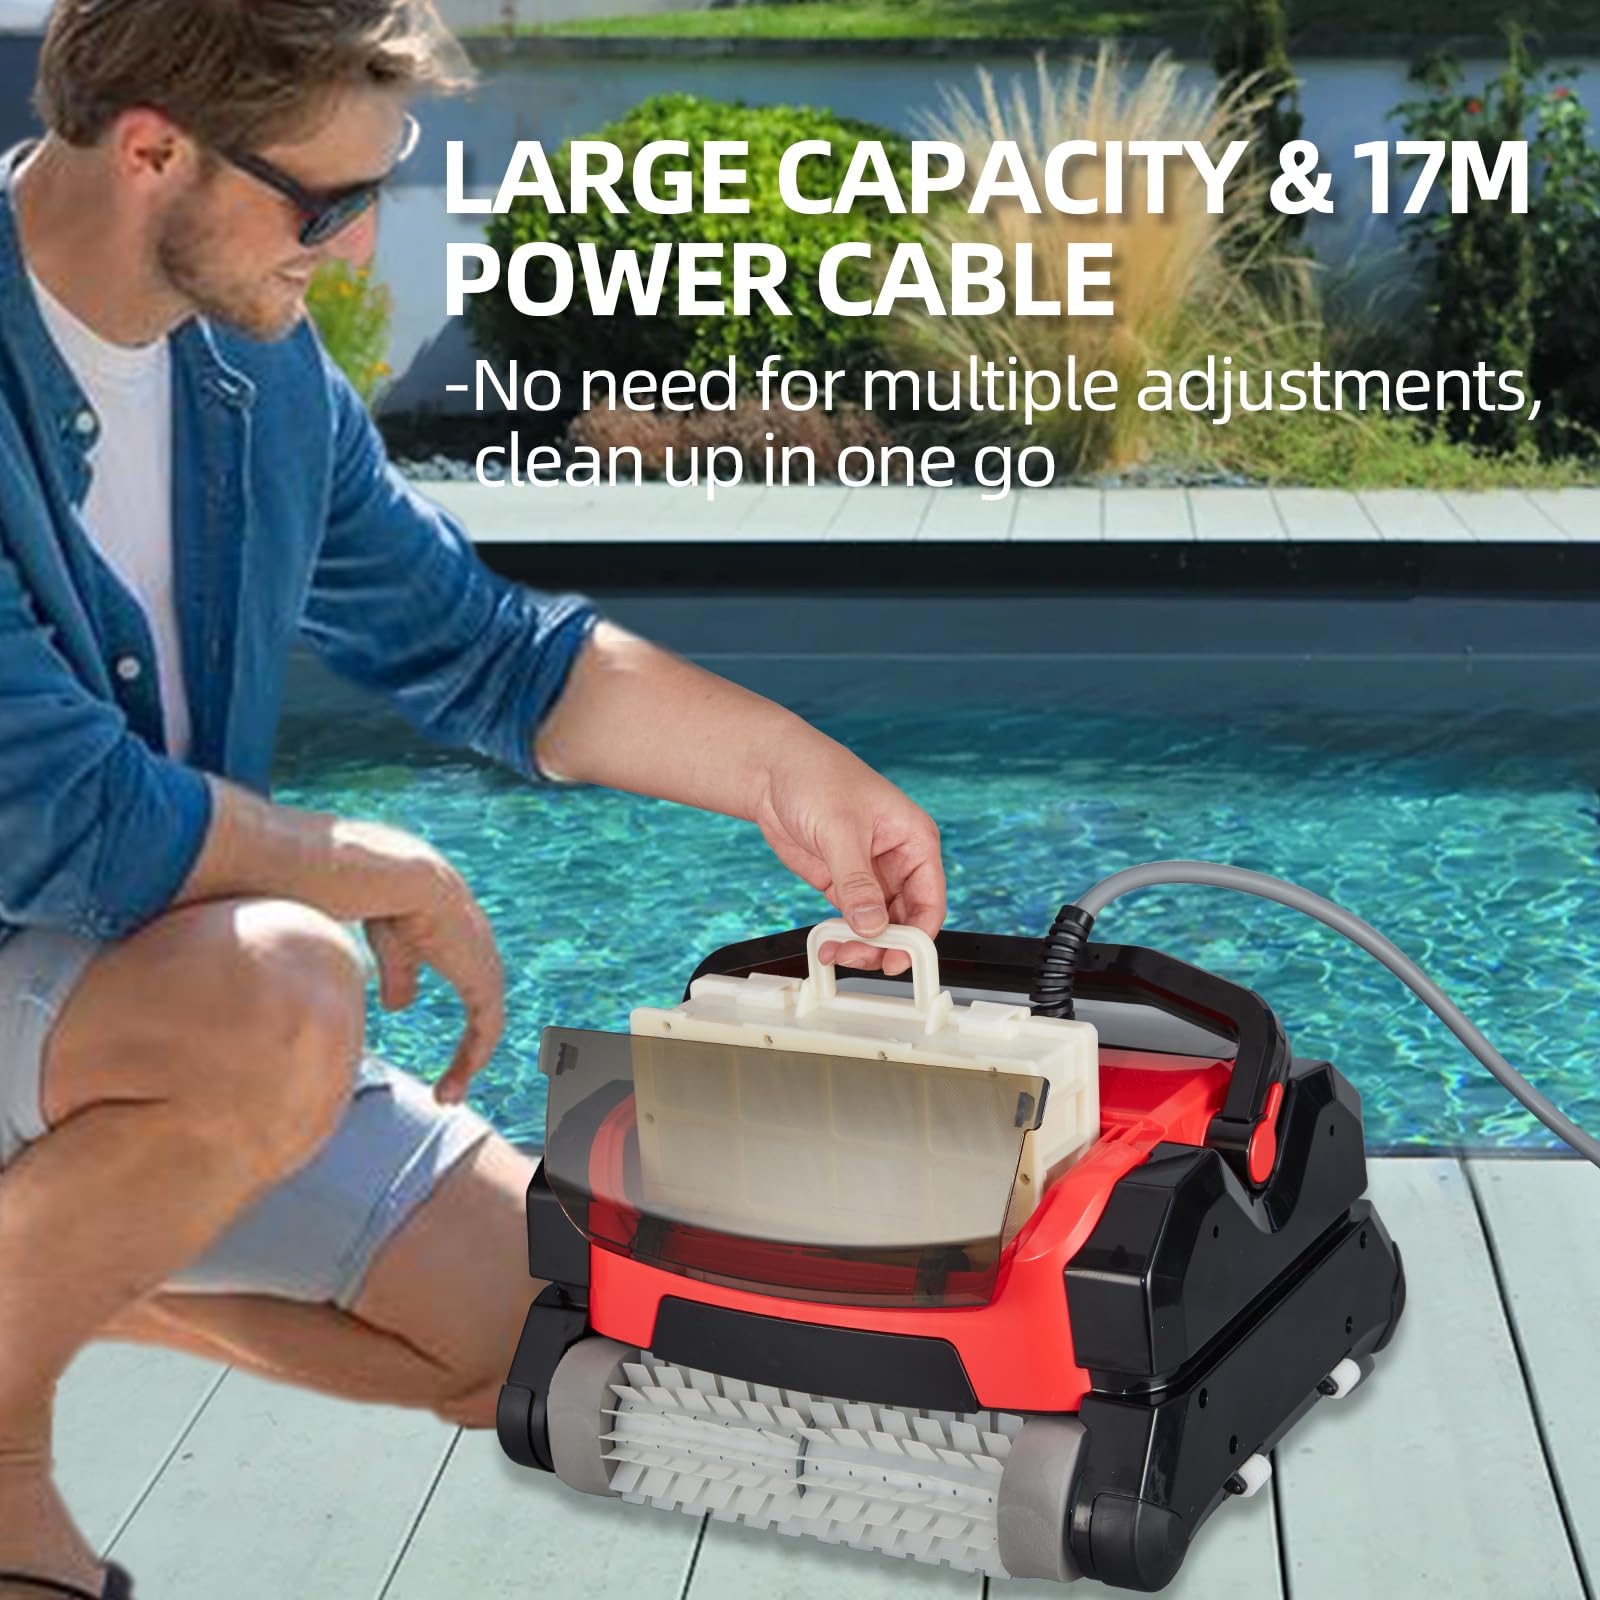 Robotic Pool Vacuum Cleaner 130W, Waterliner Clean, Wall Climbing Capability, w/Top Load Filters for Above/In-Ground Pools Up to 30FT in Length